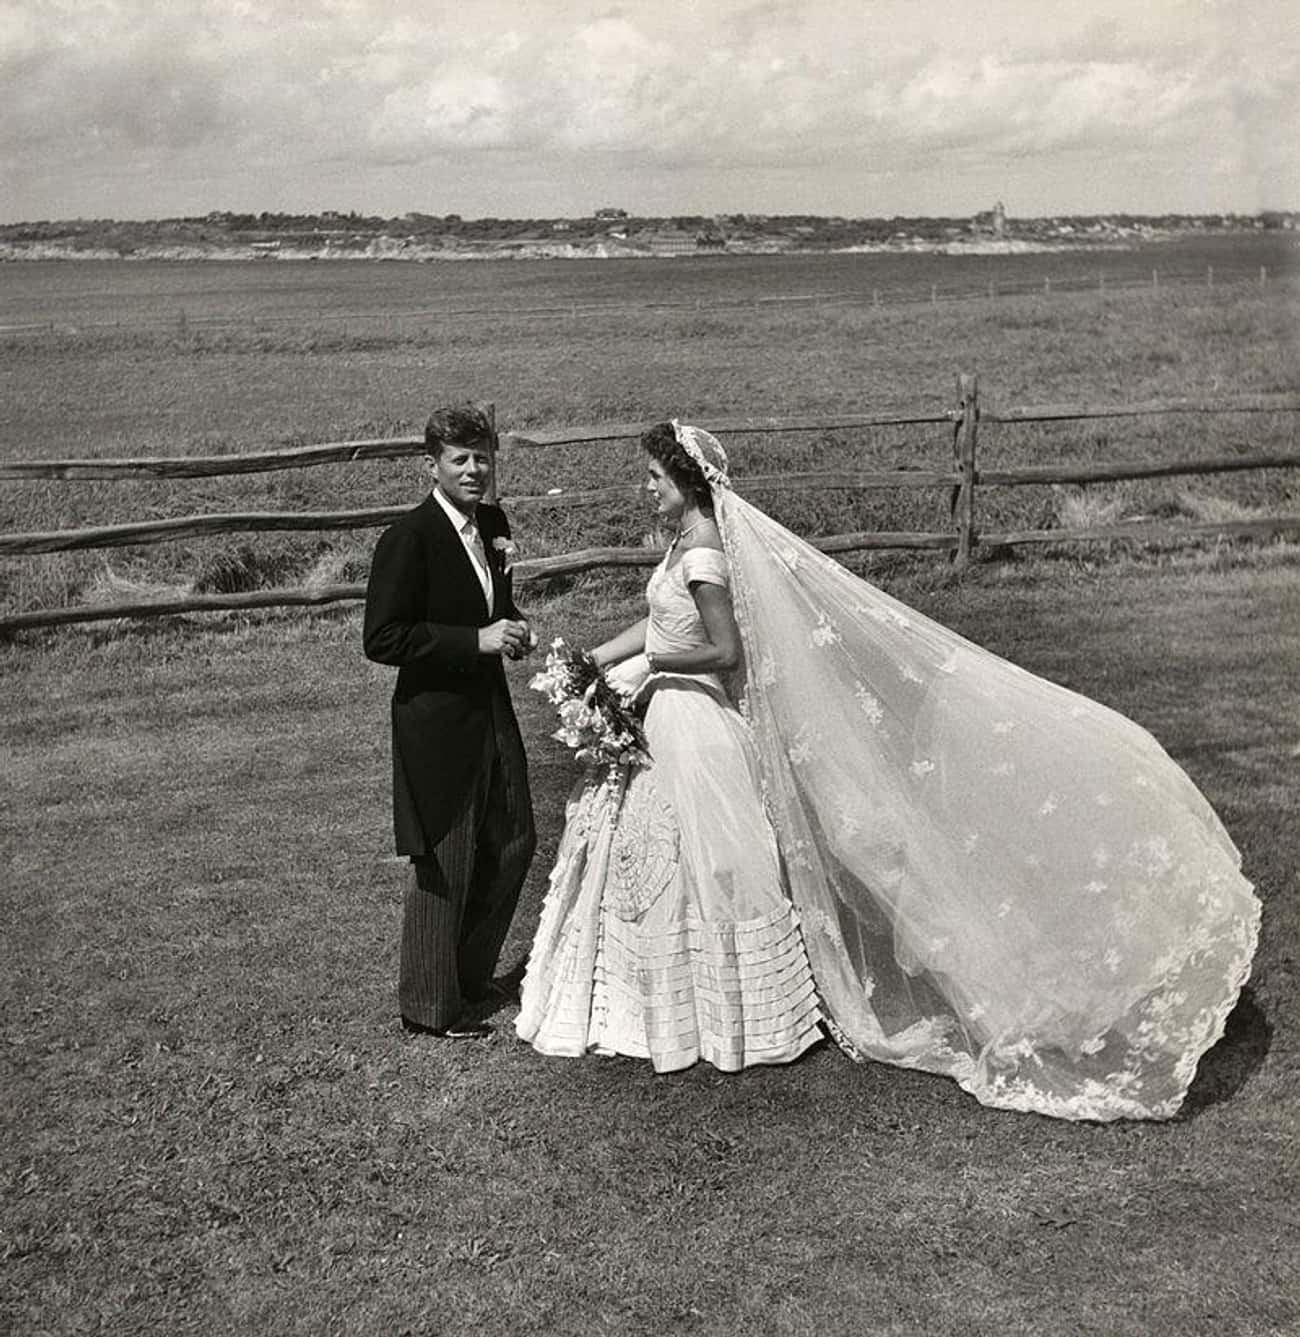 1961: John F. Kennedy And Jacqueline Kennedy